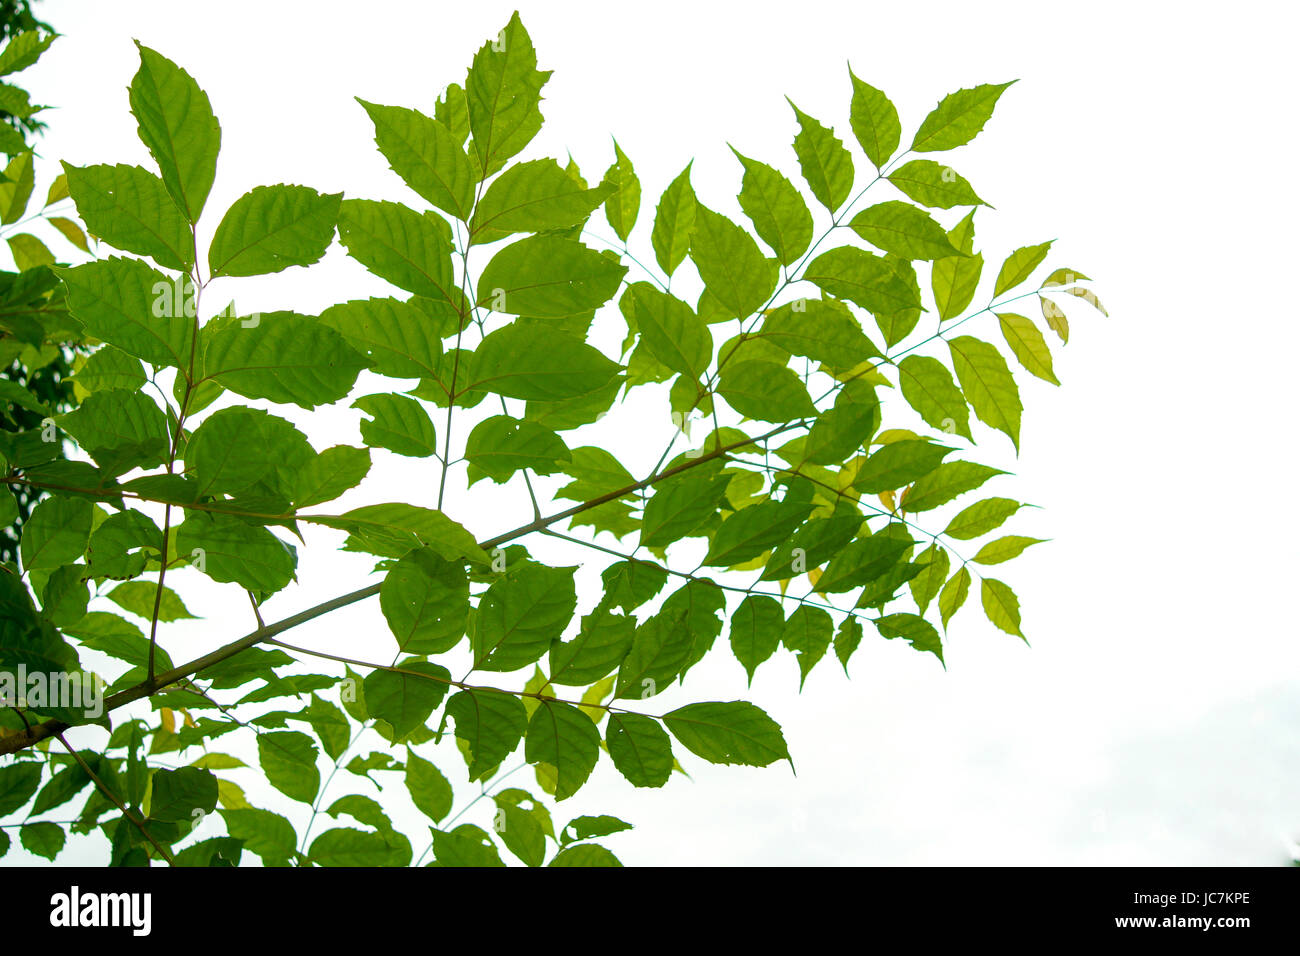 The branches and leaves are green on a white background. Stock Photo